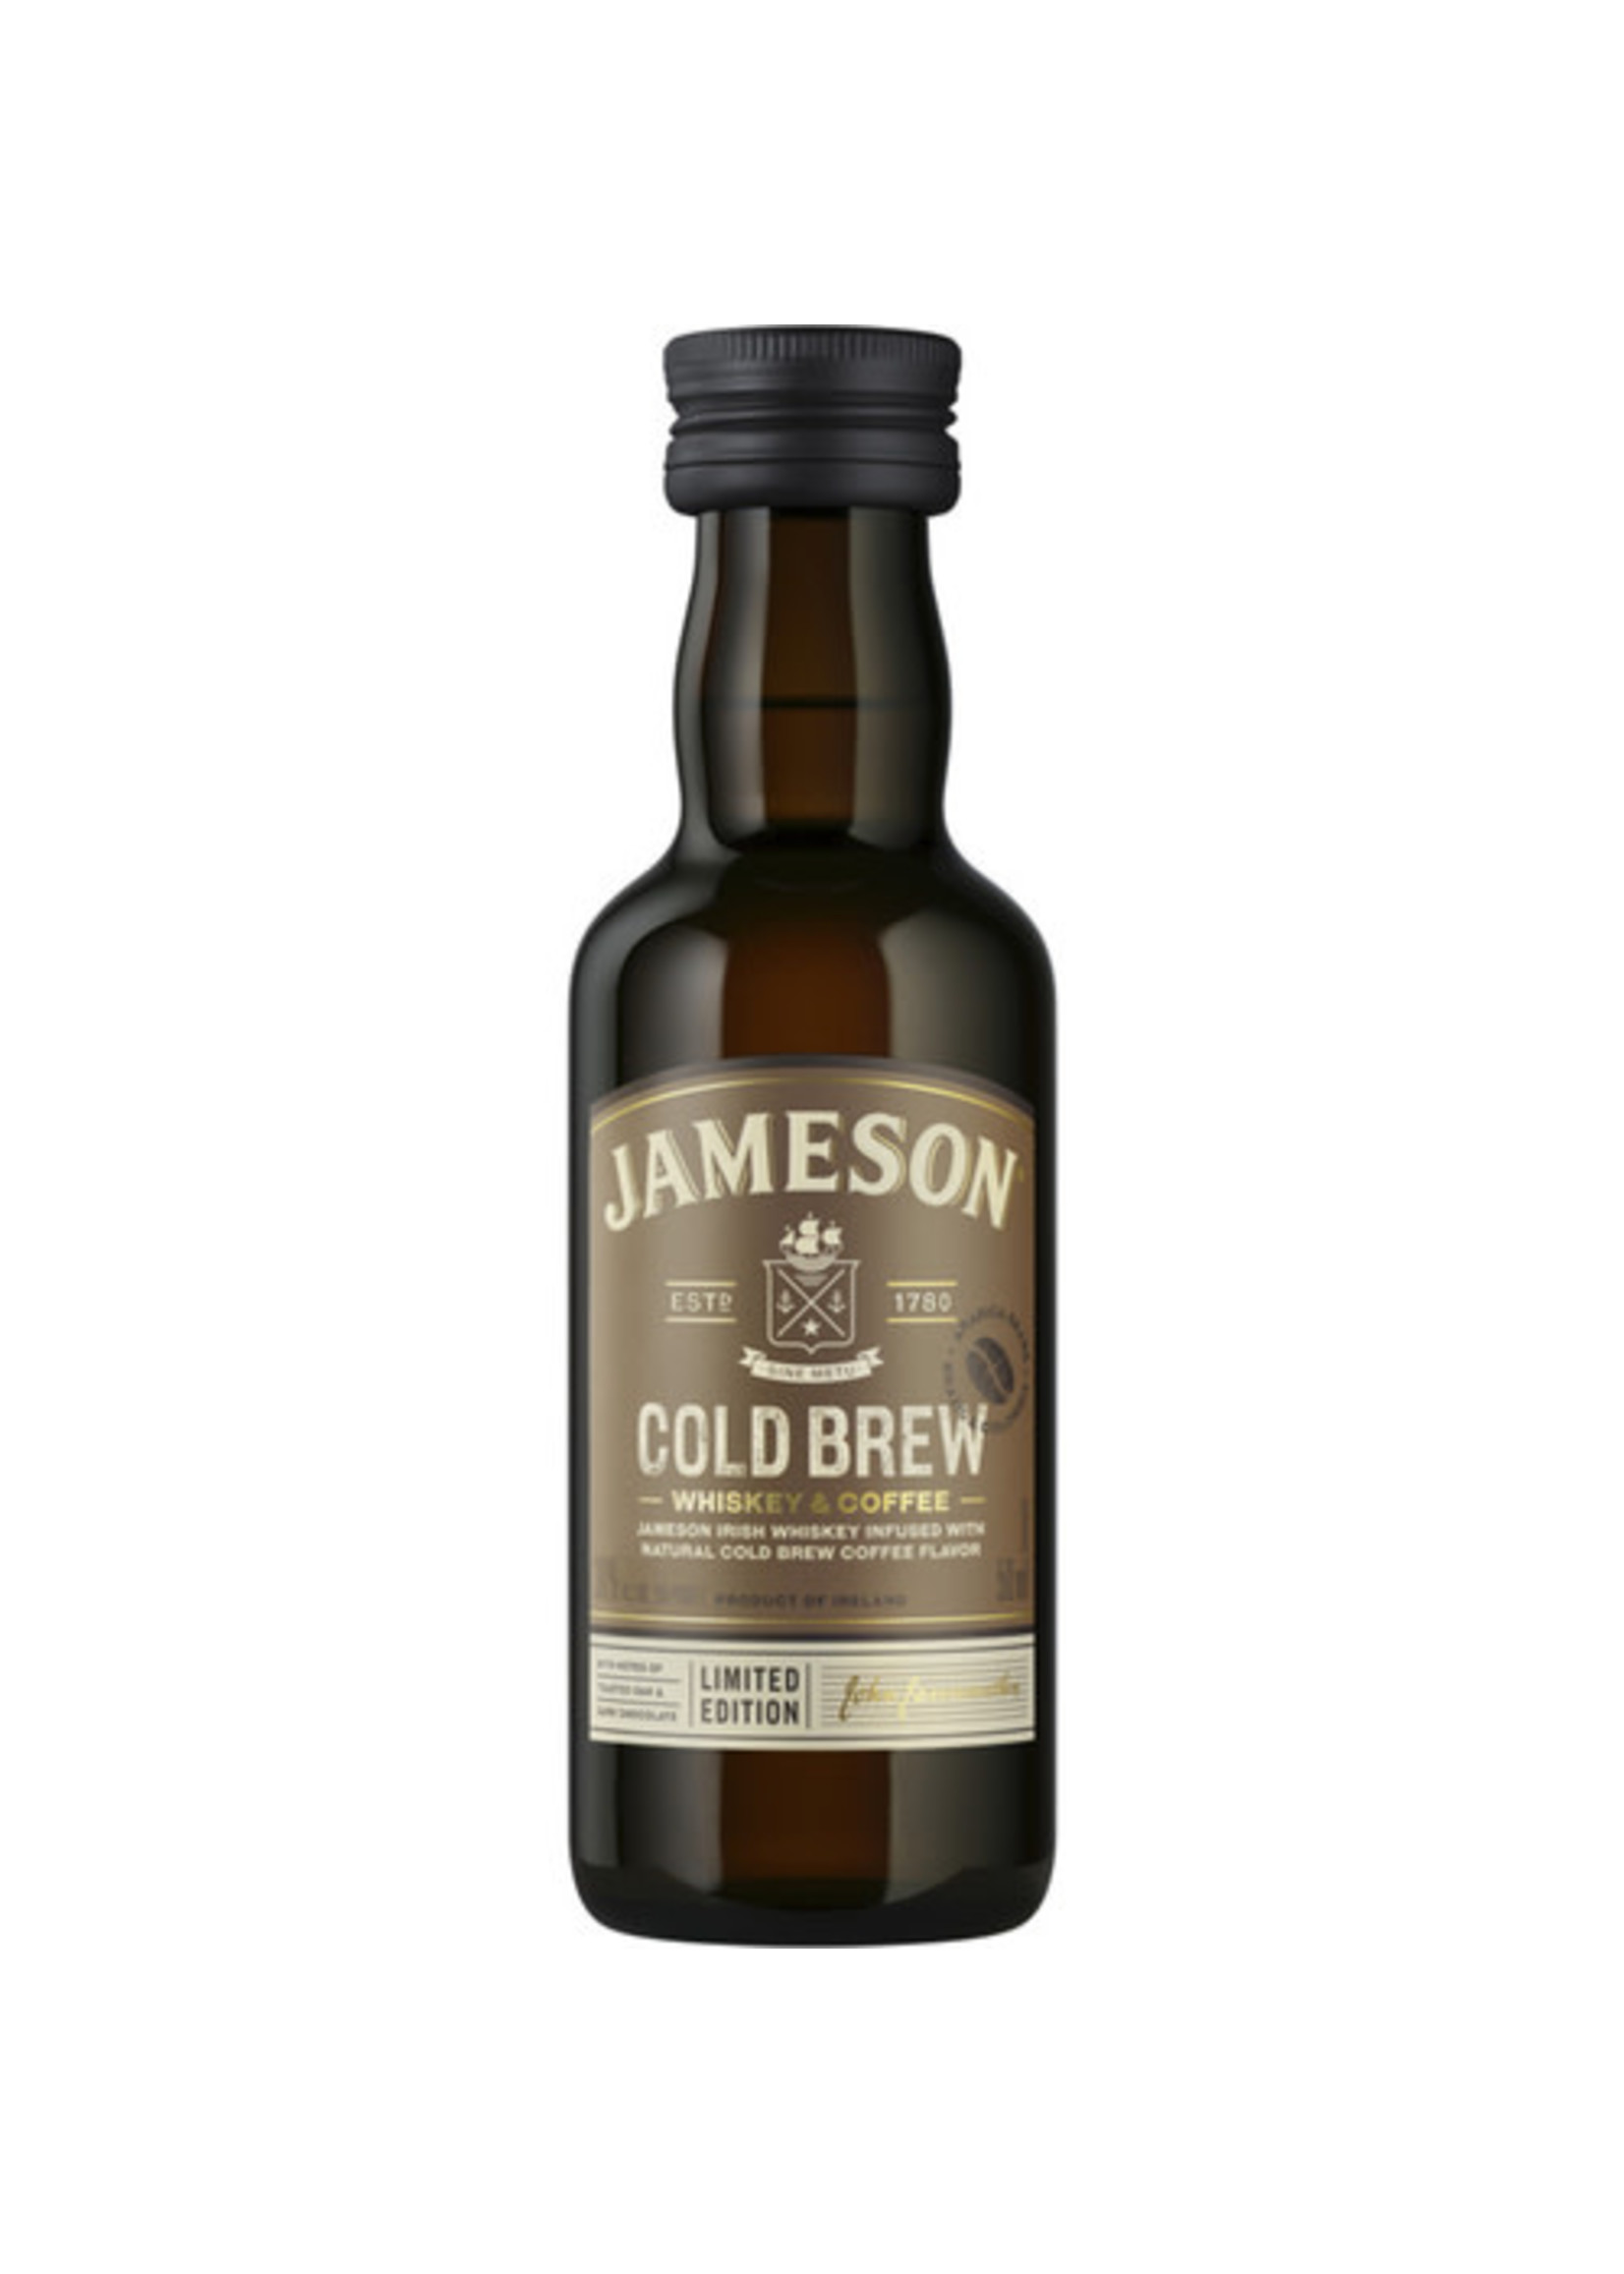 Jameson Cold Brew Limited Edition 60Proof 50ml